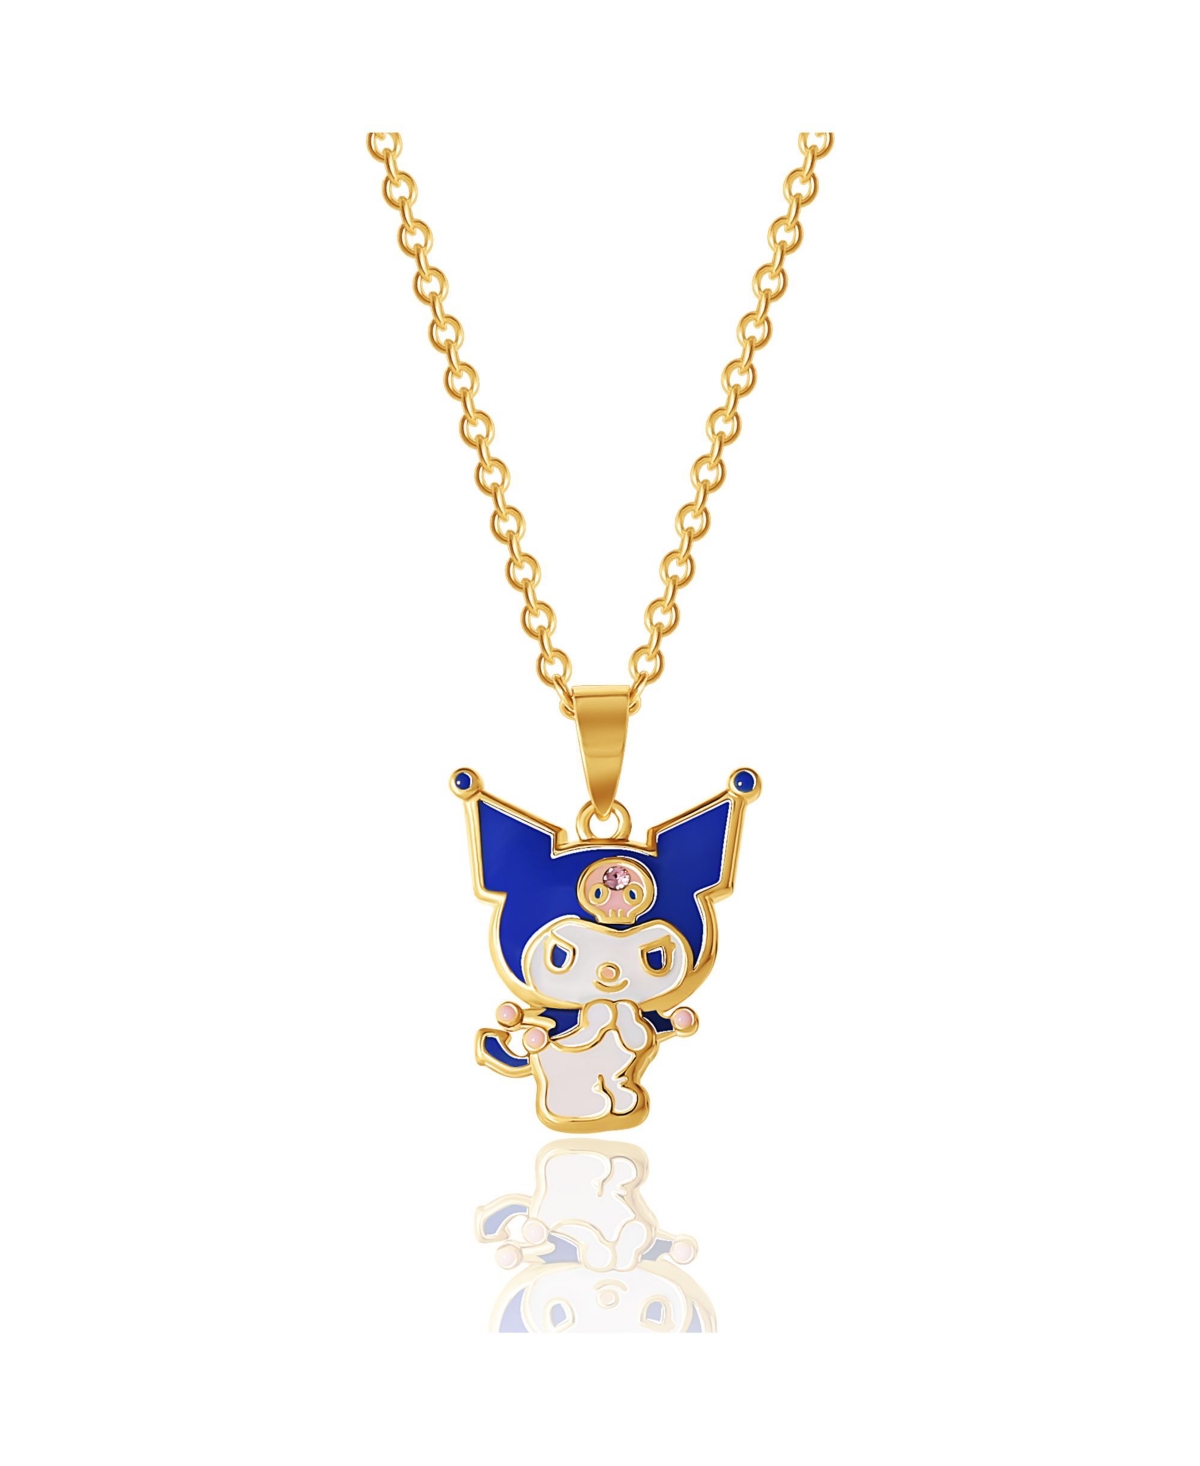 Sanrio Yellow Gold Flash Plated and Light Rose Crystal Kuromi Pendant - 18'' Chain, Officially Licensed Authentic - Dark blue, white